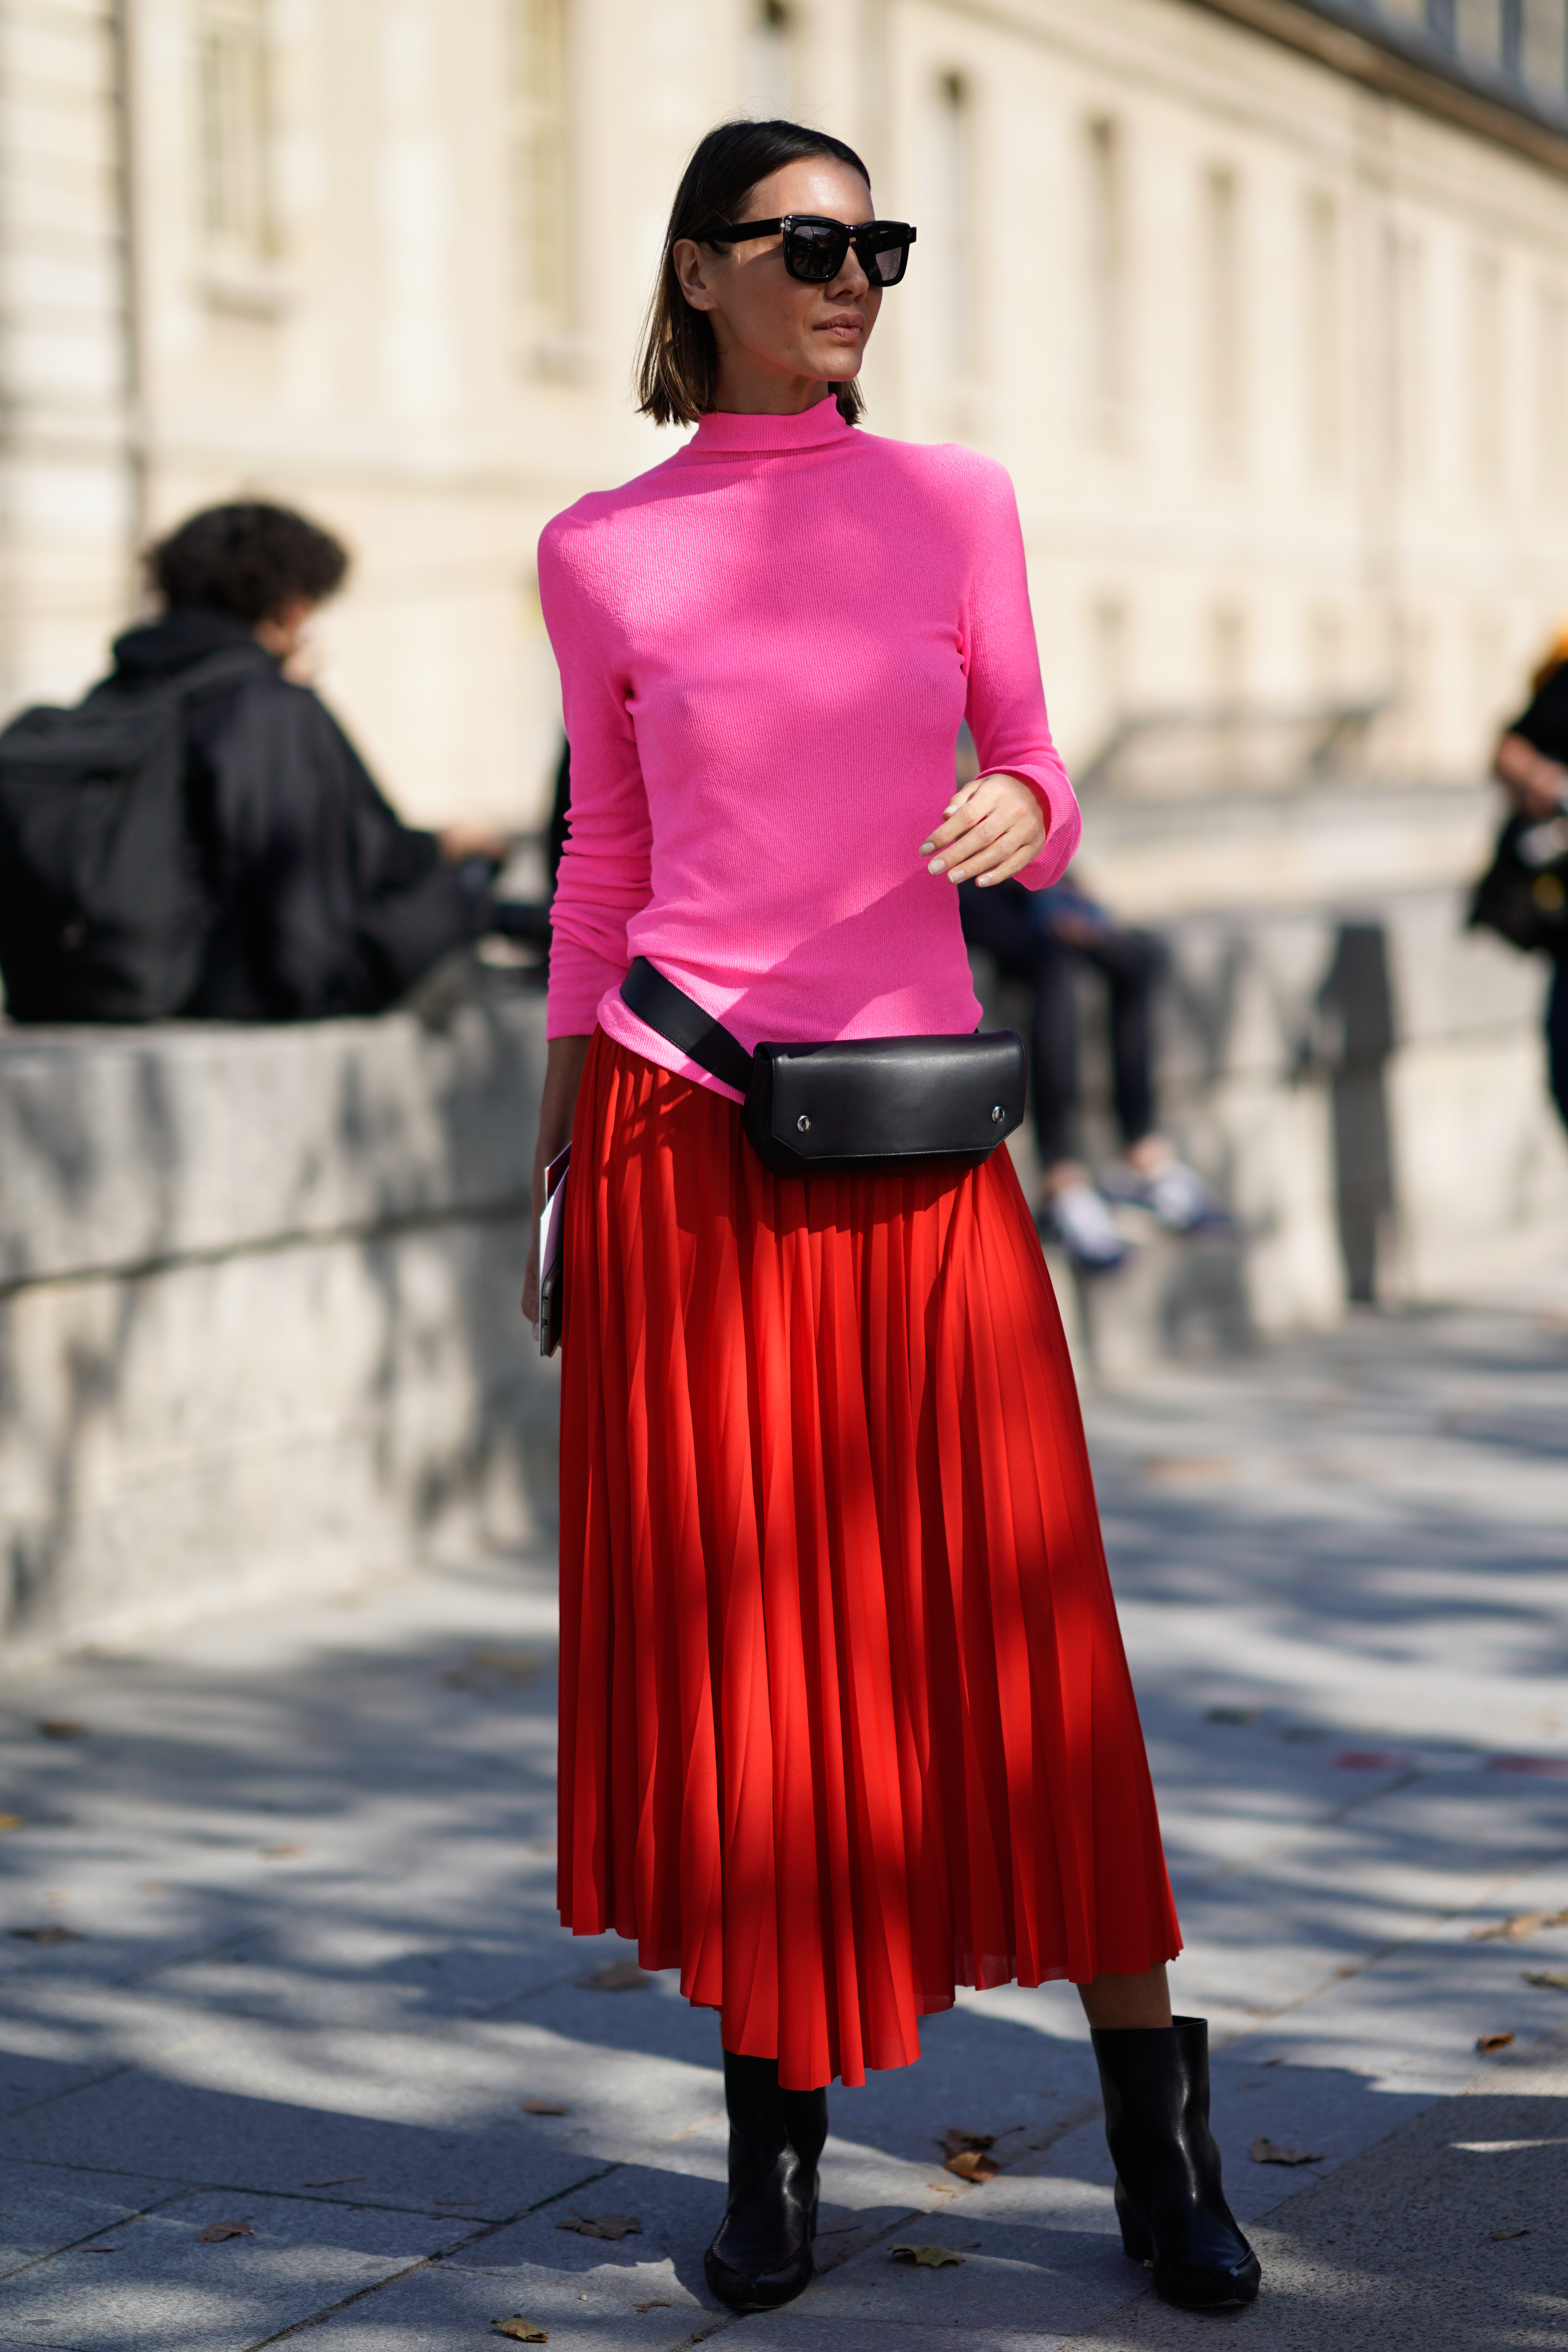 PARIS, FRANCE - SEPTEMBER 29: Julie Pelipas wears a pink top, a red pleated skirt, outside Nina Ricci, during Paris Fashion Week Womenswear Spring/Summer 2018, on September 29, 2017 in Paris, France. (Photo by Edward Berthelot/Getty Images For Nina Ricci)